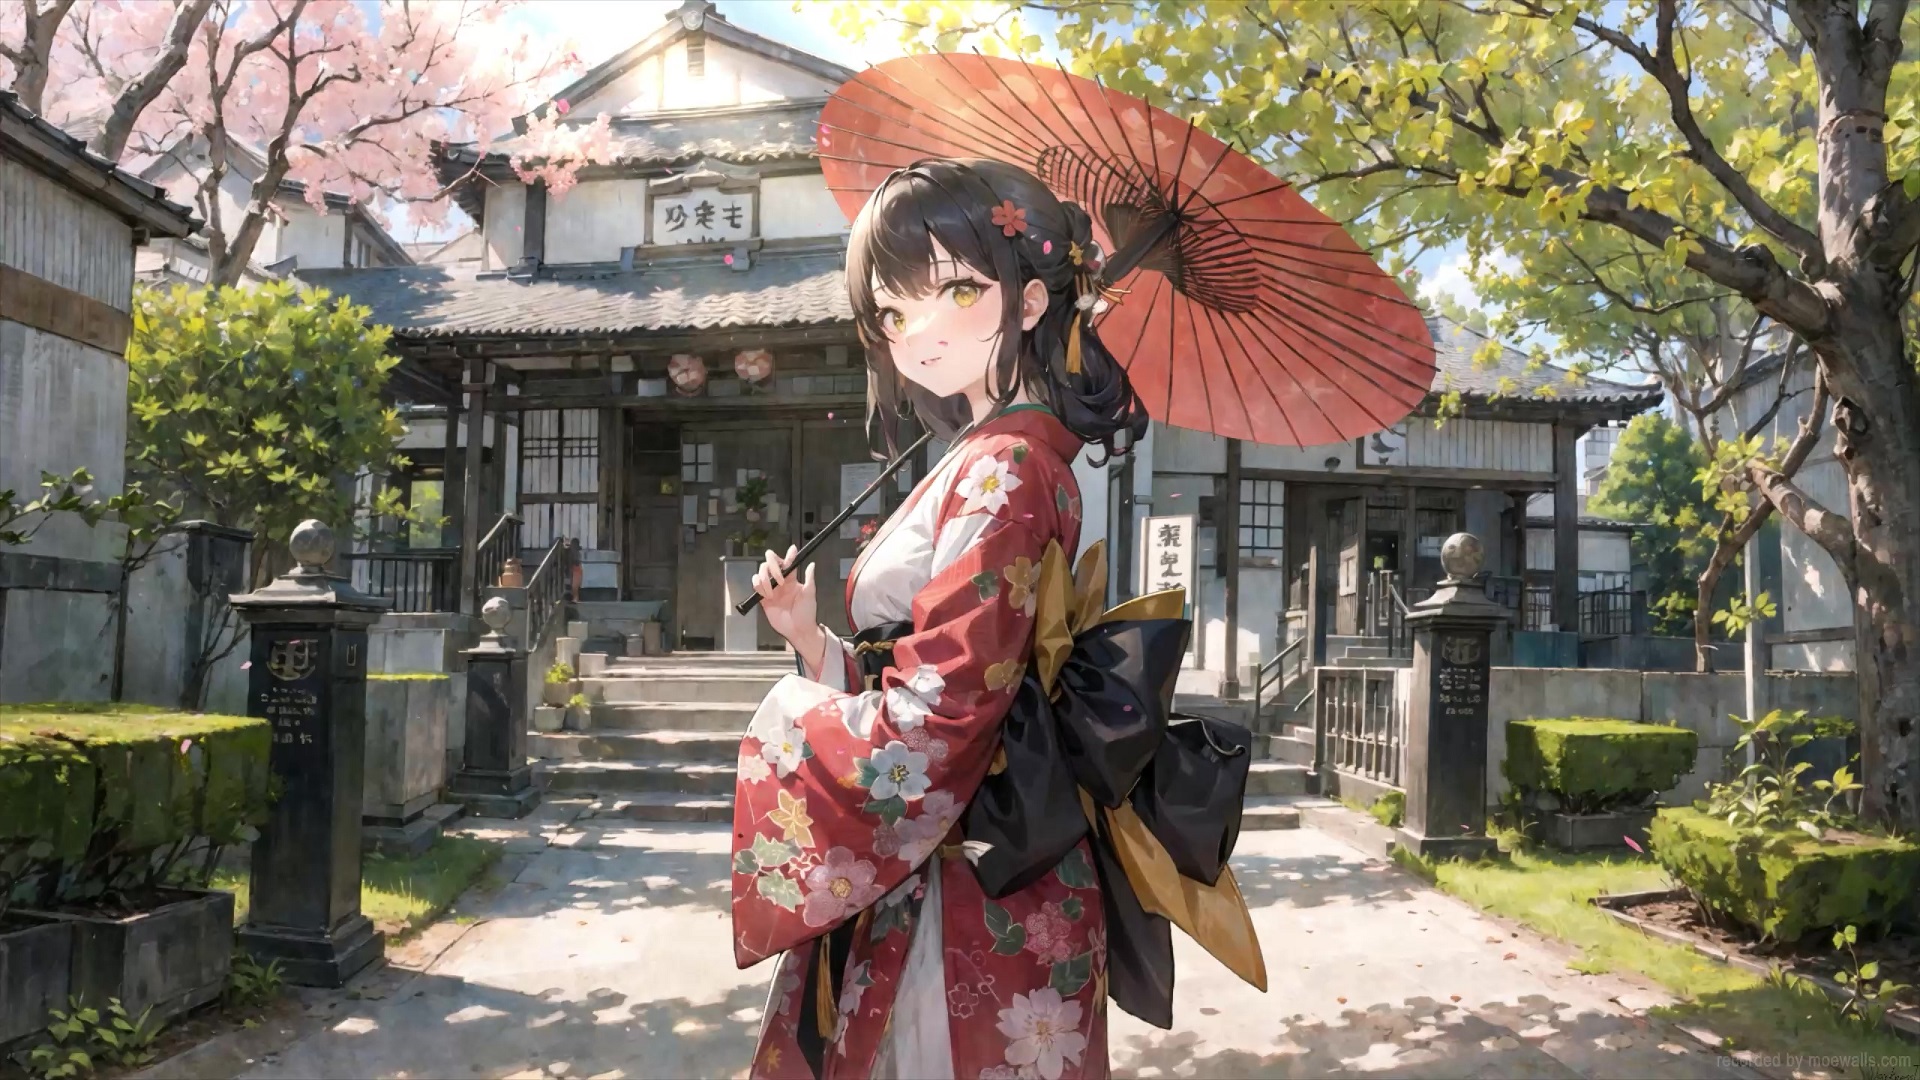 Kimono Anime Girl Pfp - Top 20 Kimono Anime Girl Pfp, Profile Pictures,  Avatar, Dp, icon [ HQ ]